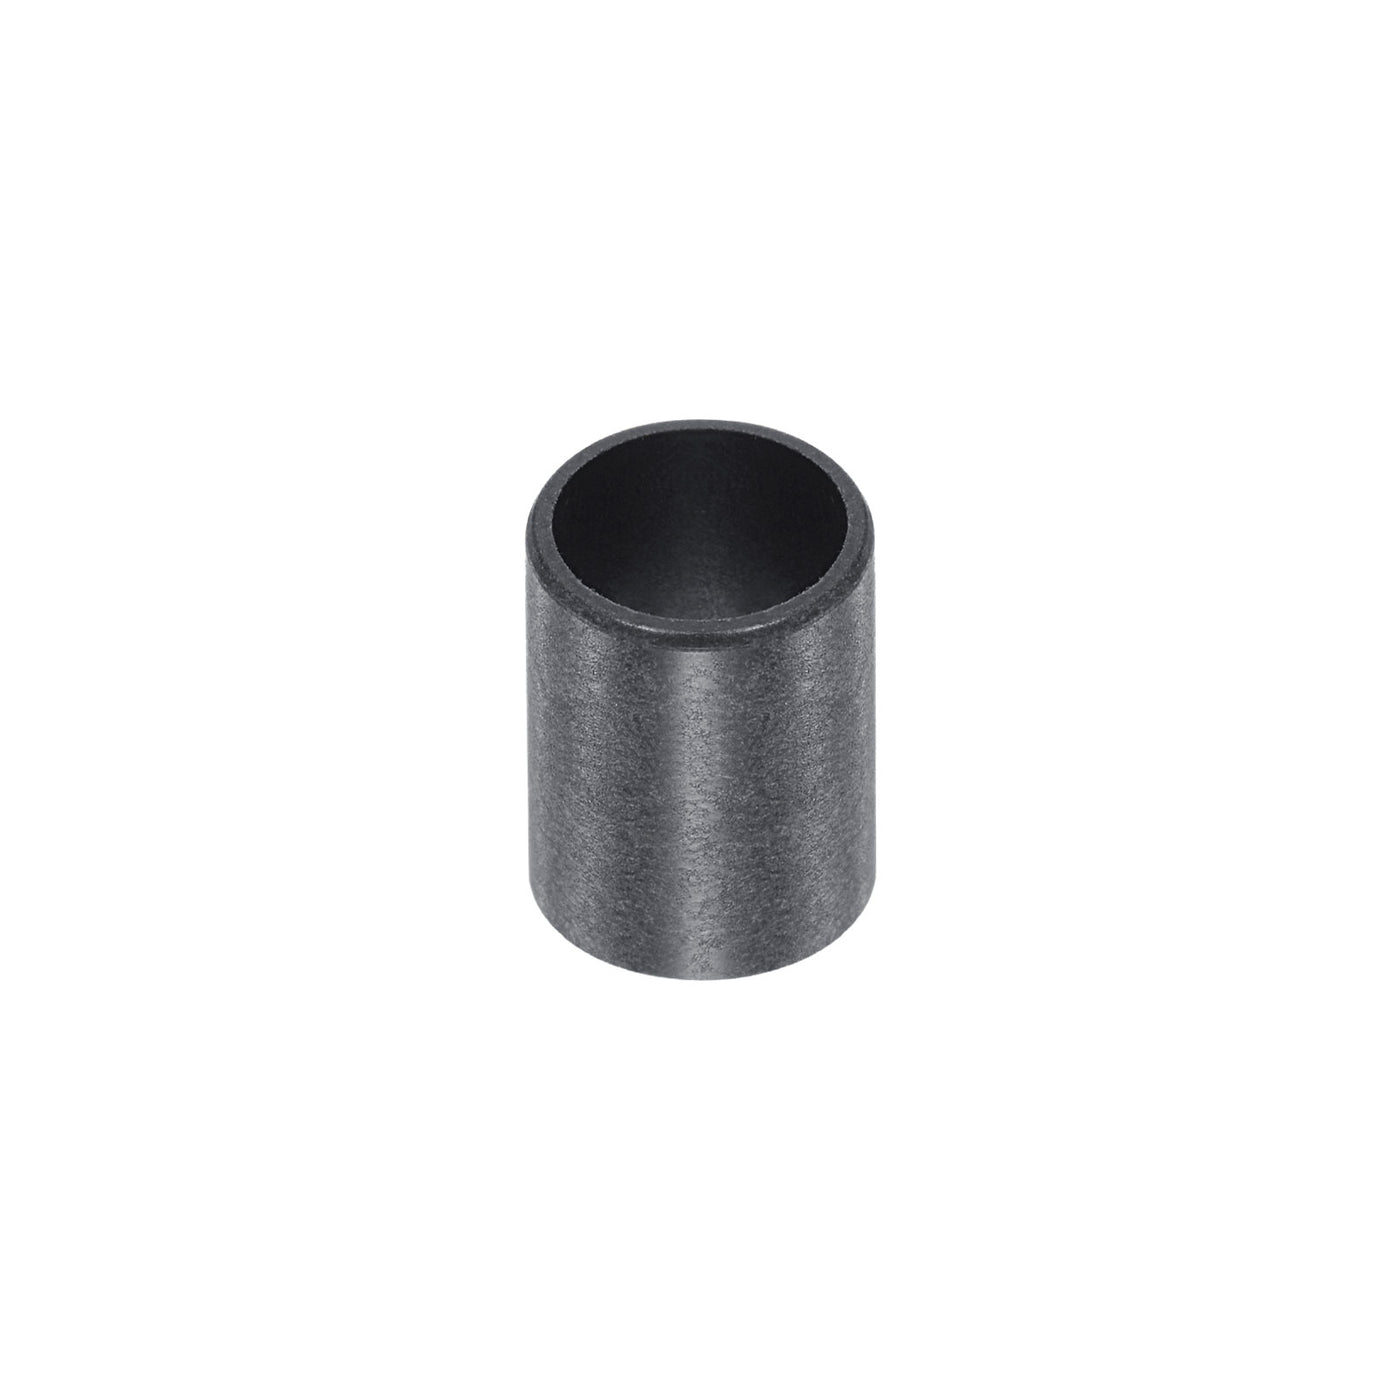 uxcell Uxcell Sleeve Bearings 10mmx12mmx17mm POM Wrapped Oilless Bushings Black